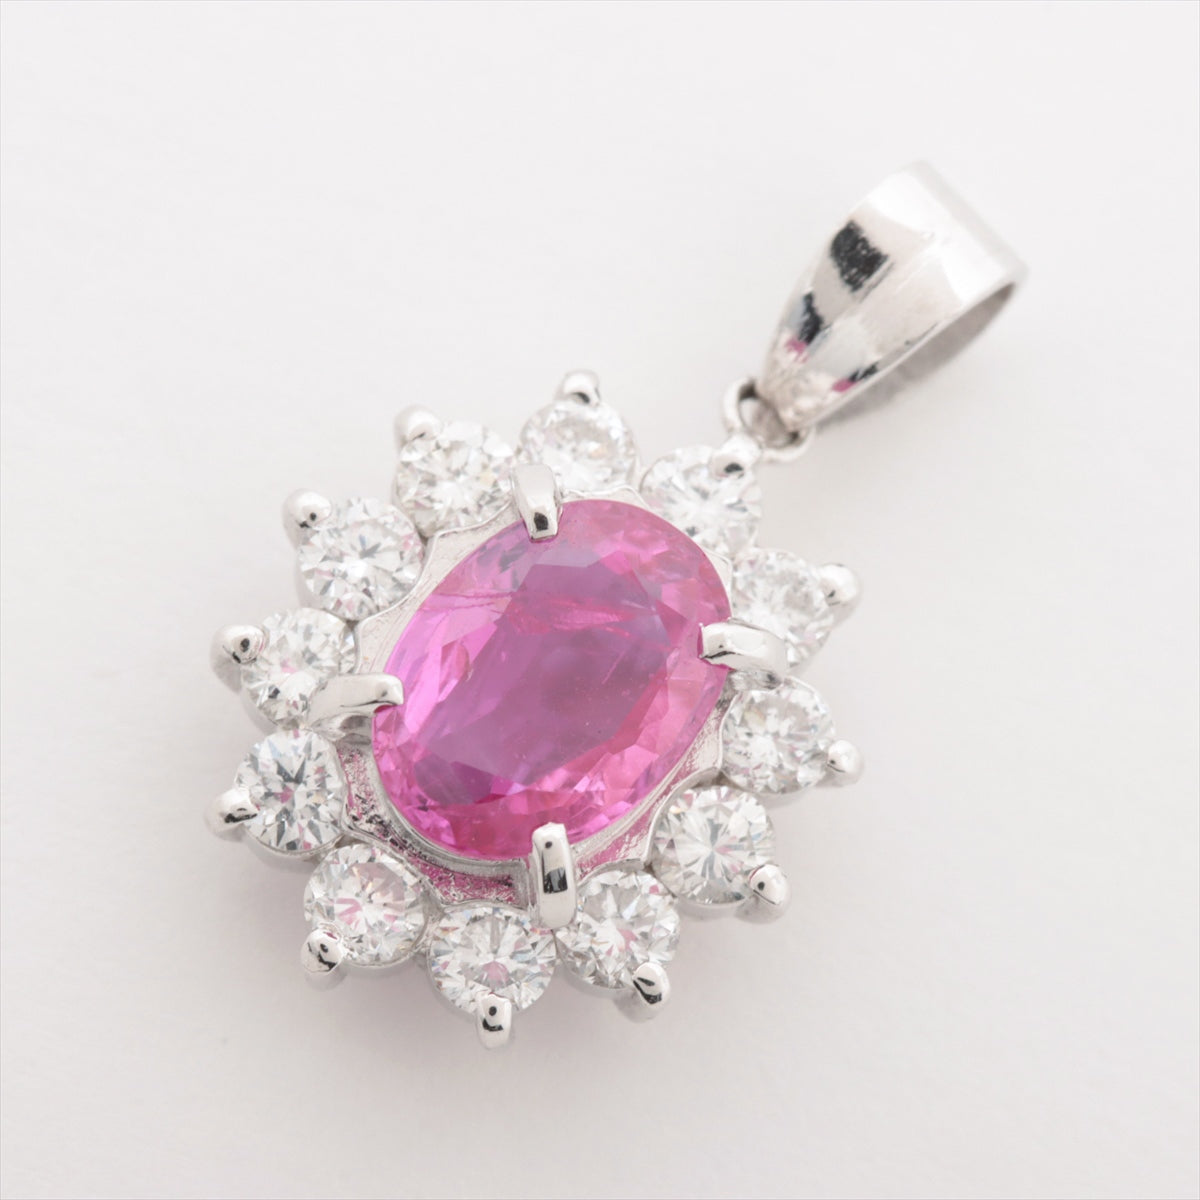 Pink sapphire Diamond Necklace top Pt900 2.8g 112 0.55 Normal heat-treated